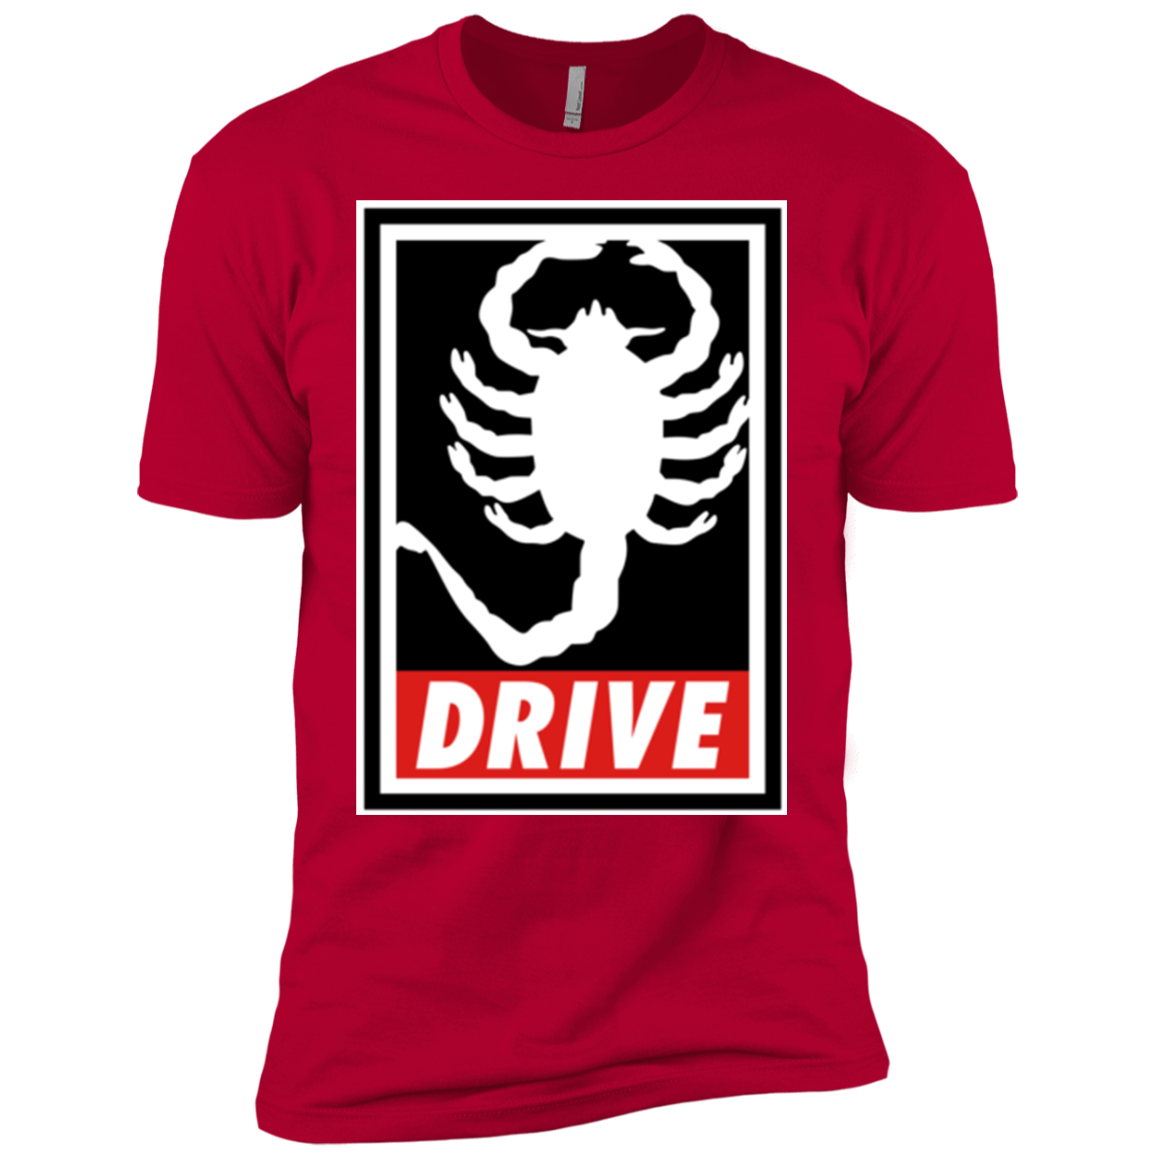 Obey and drive Boys Premium T-Shirt